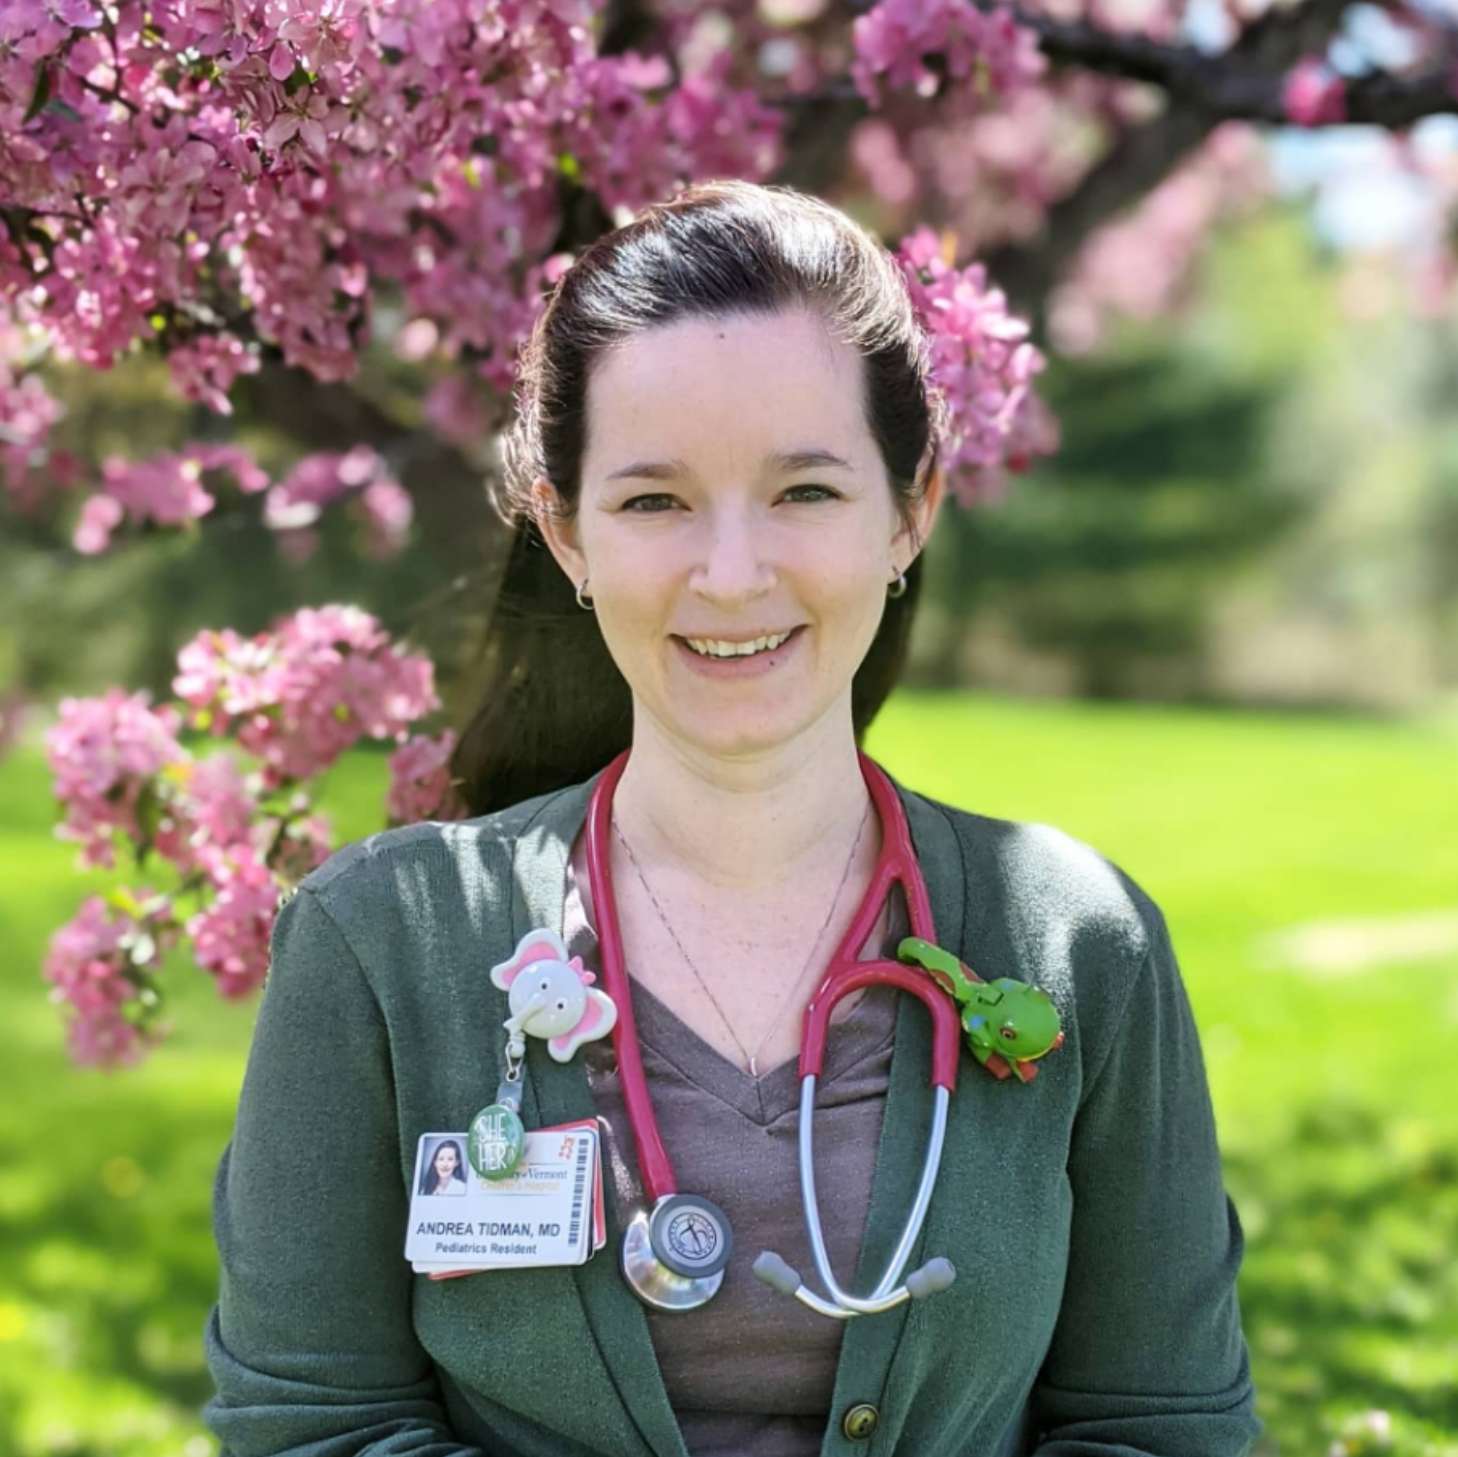 A woman with a stethoscope standing in front of a blossoming tree.